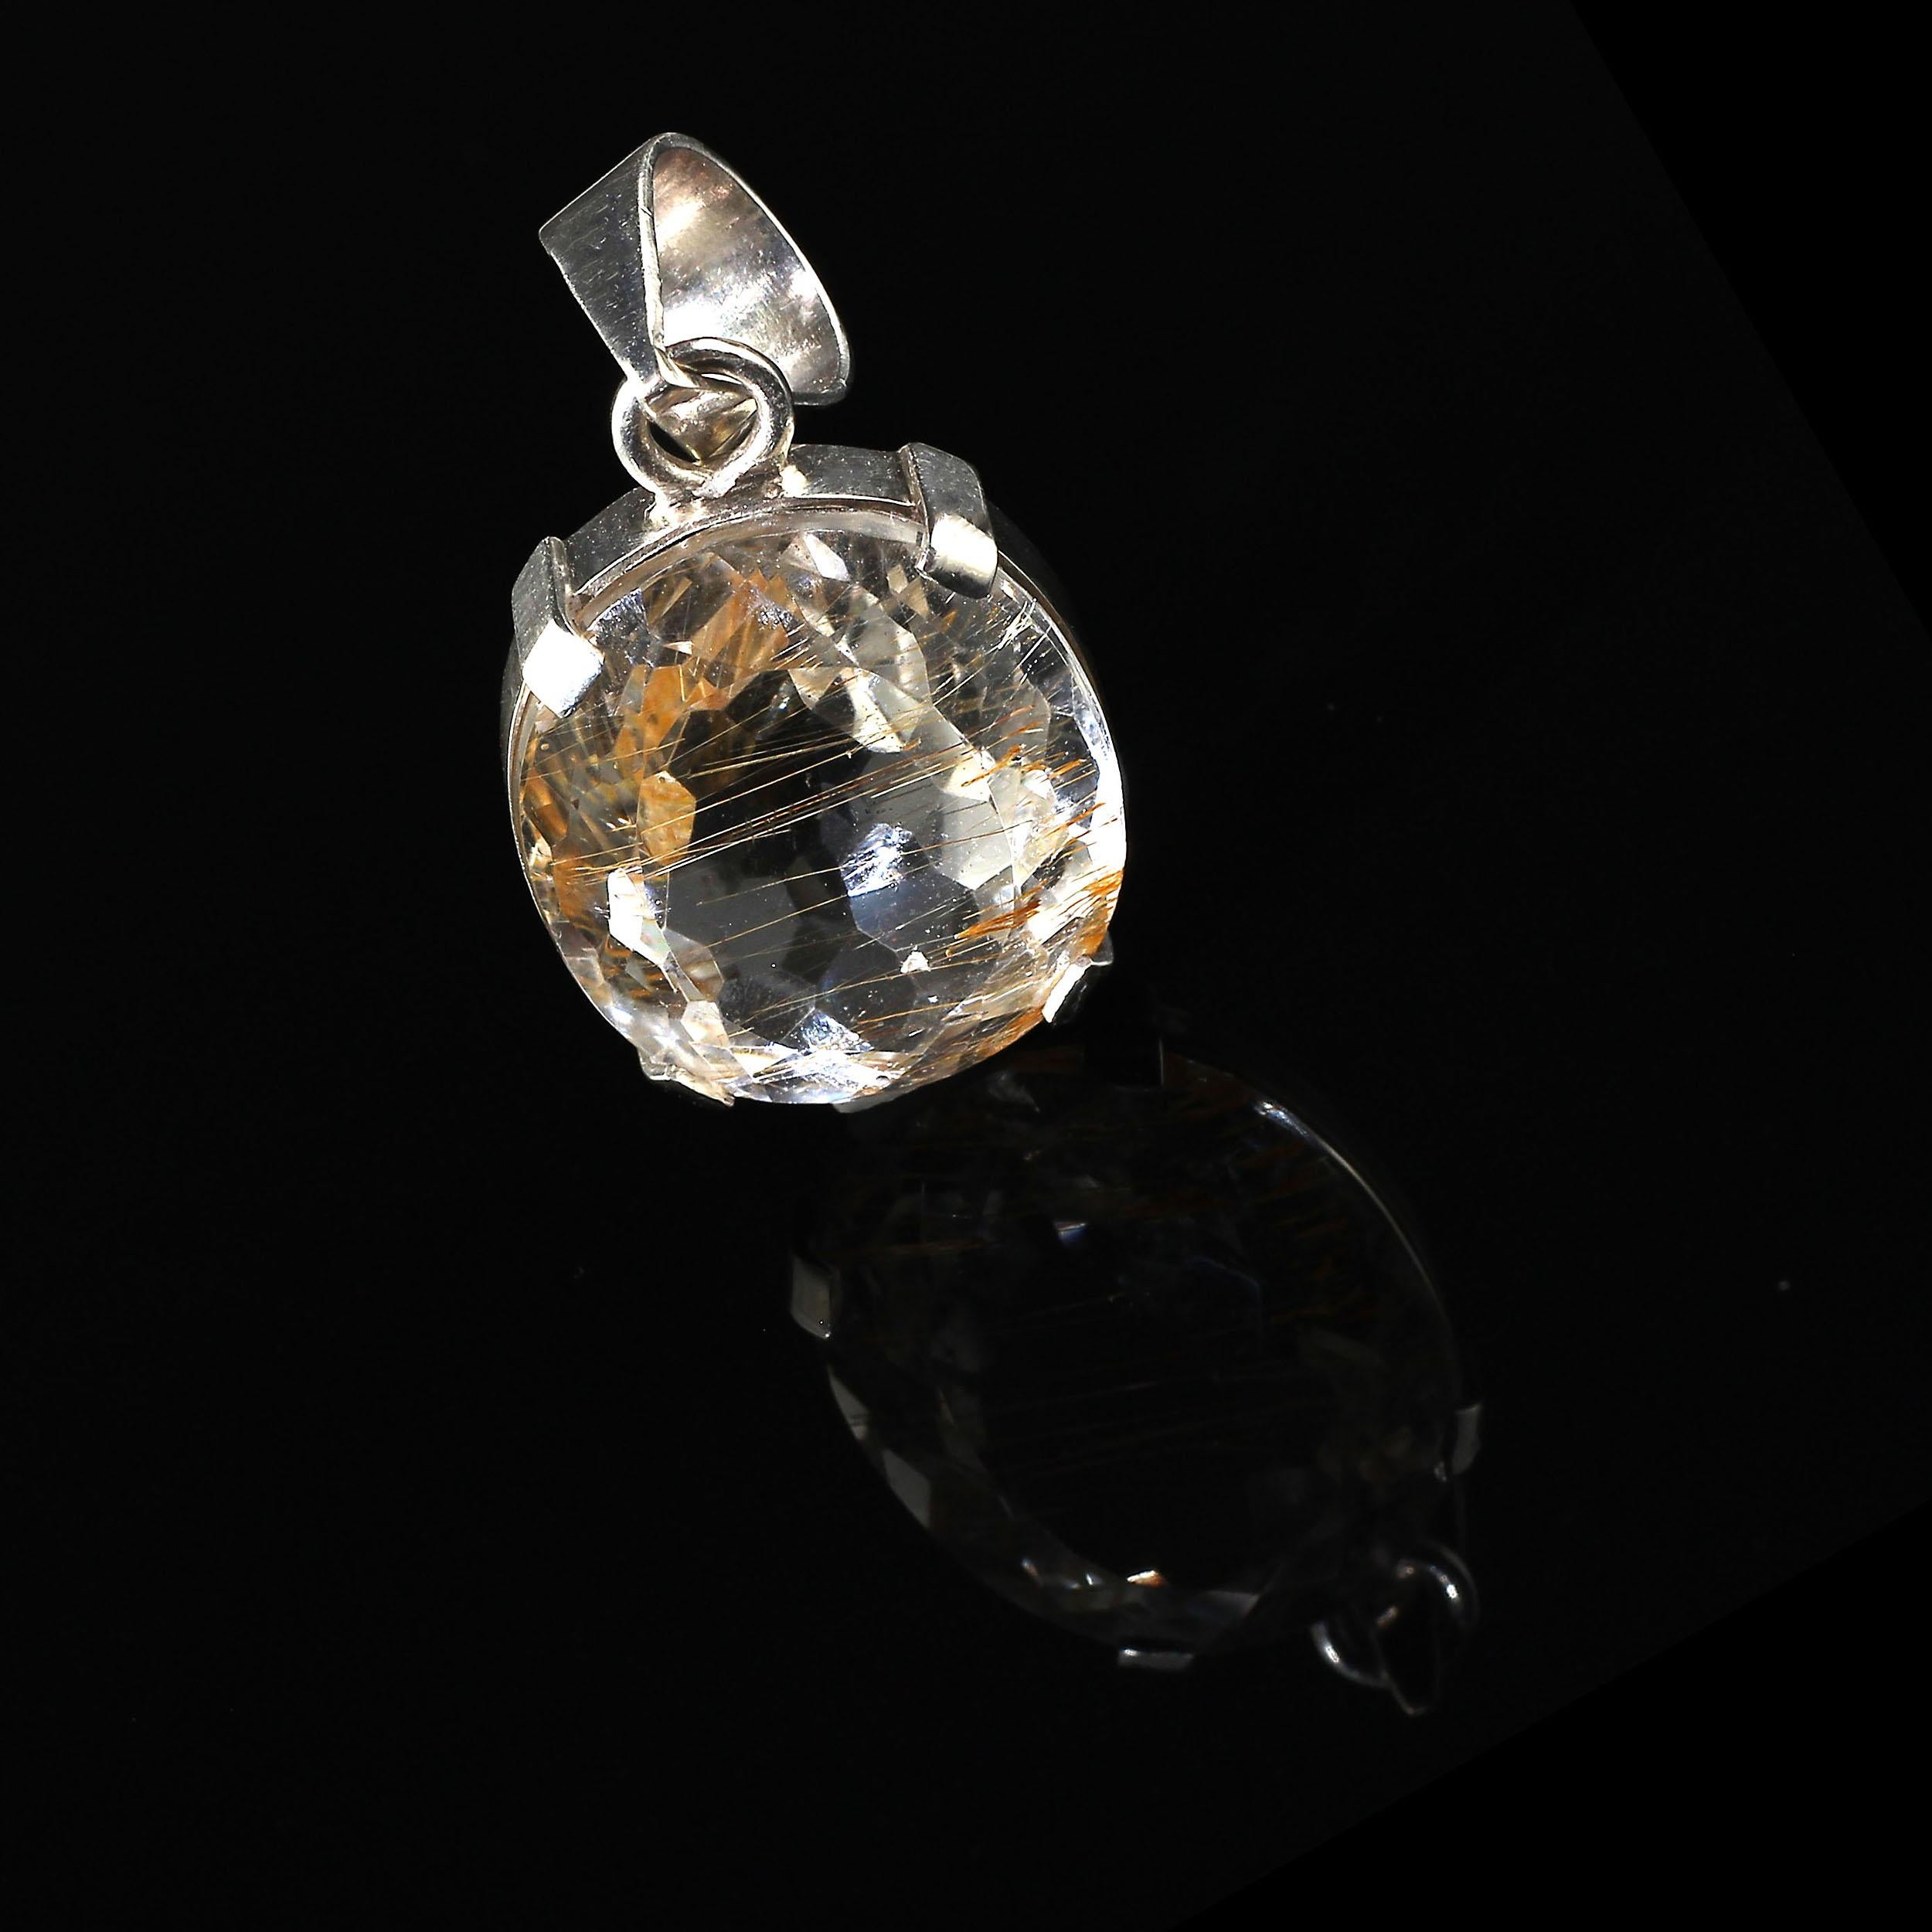 Brazilian Quartz Crystal Pendant with Rutile in Sterling Silver Setting 1